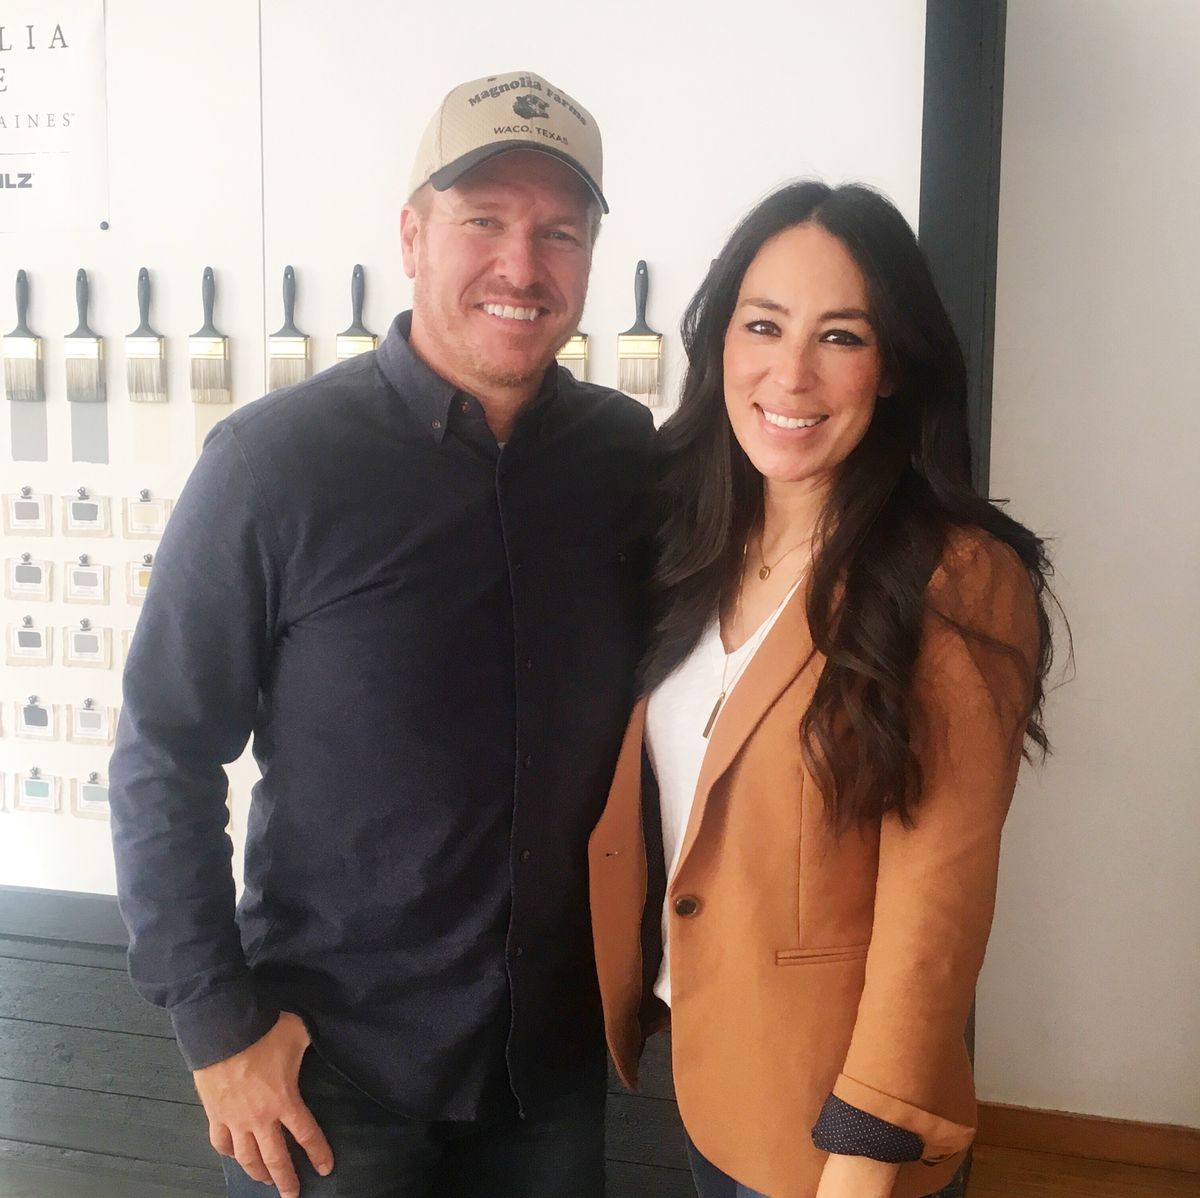 10 Things I Learned When I Took a Design Workshop with Joanna Gaines